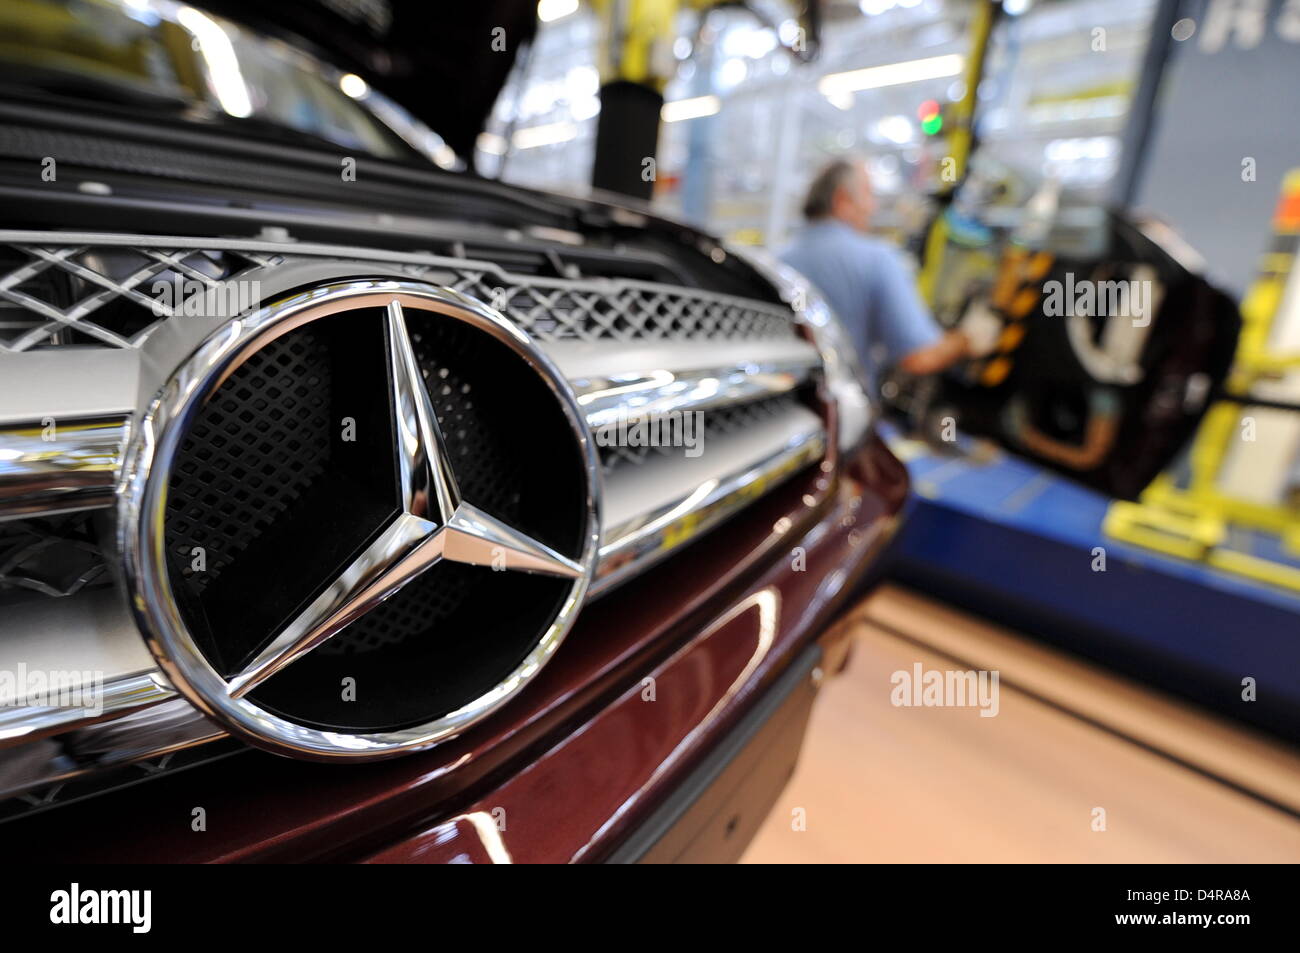 Mercedes-Benz E-Class limousines on the assembly line at the Sindelfingen plant, Germany, 16 July 2009. Photo: Bernd Weissbrod Stock Photo